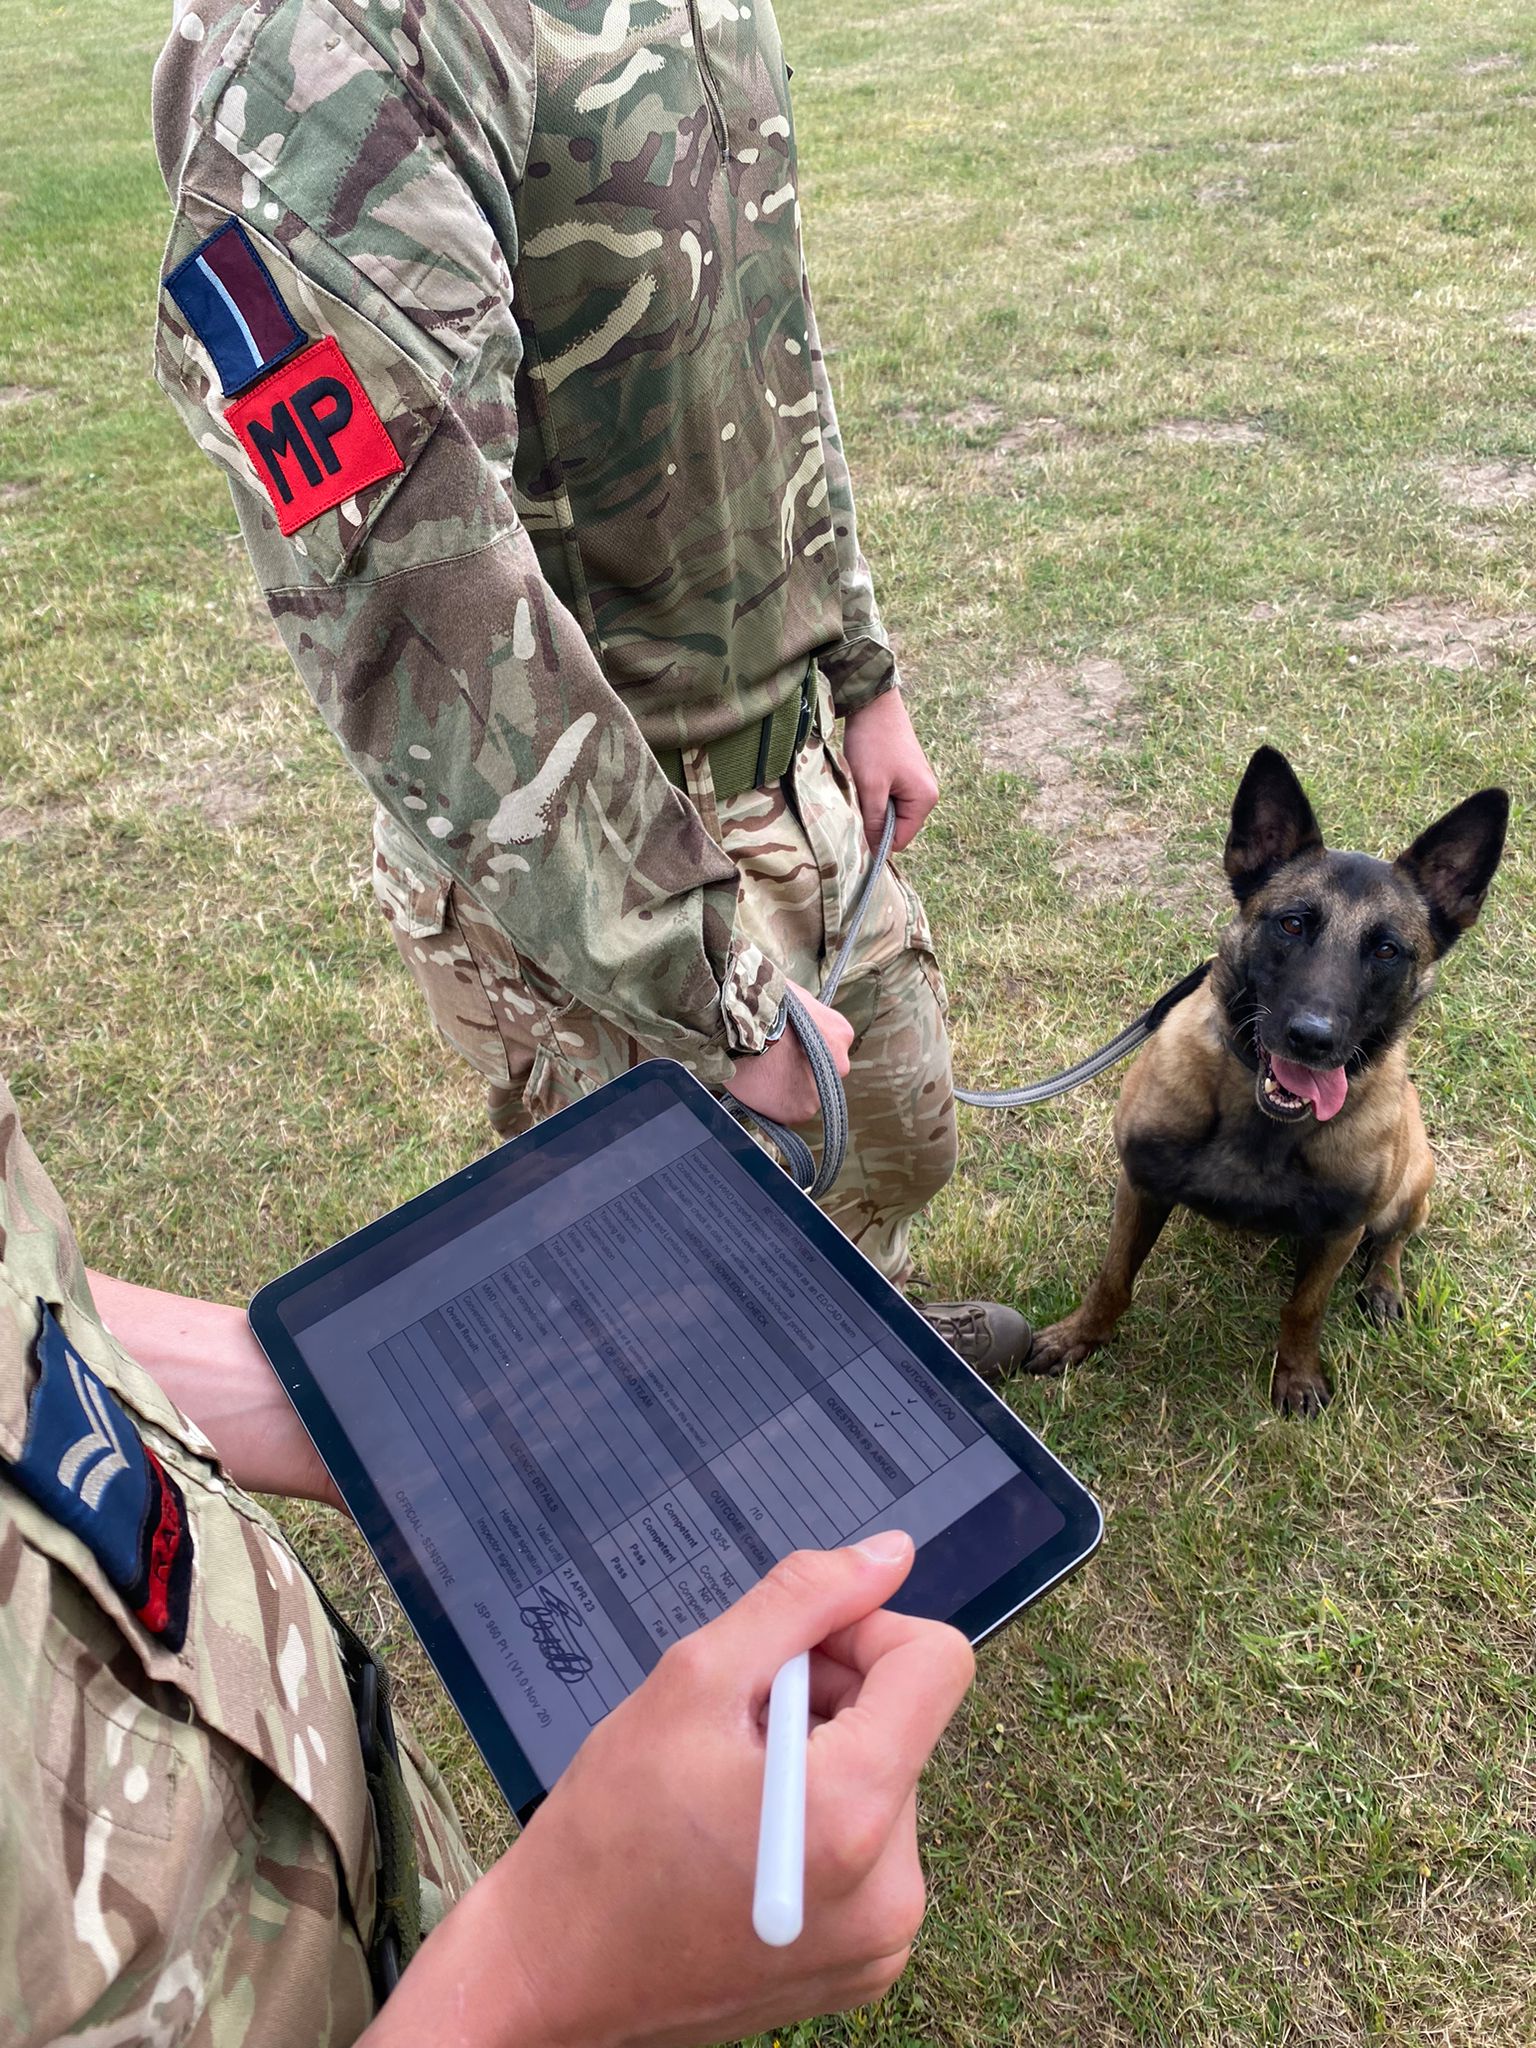 Image shows RAF Police with a military working dog, viewing a chart on their tablet device.